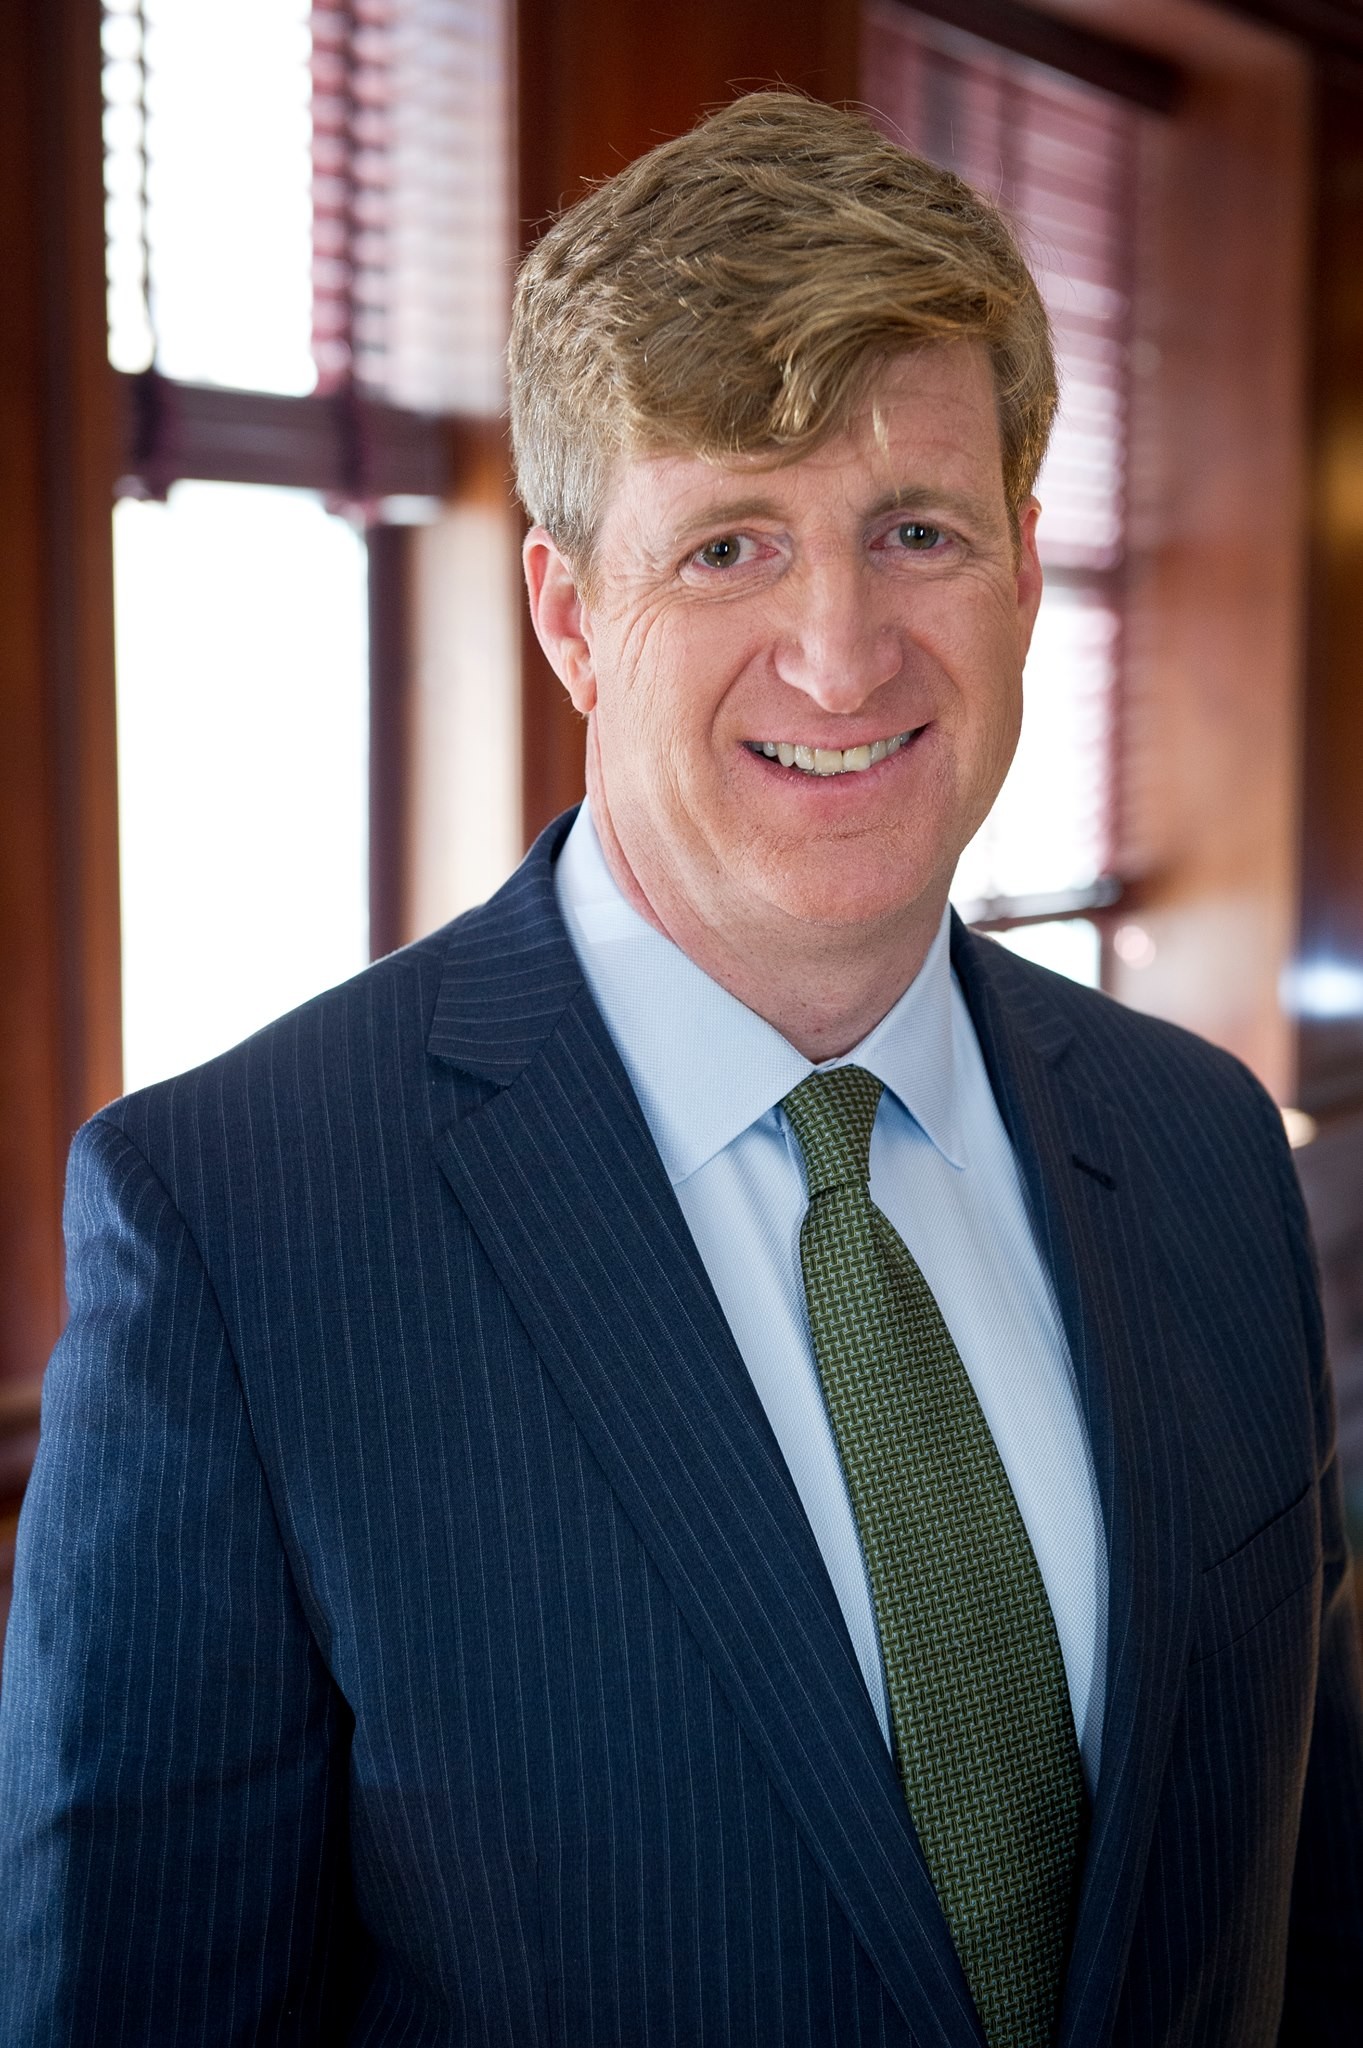 Patrick Kennedy is expected to attend Saturday’s meeting on substance abuse issues at Portsmouth Town Hall.